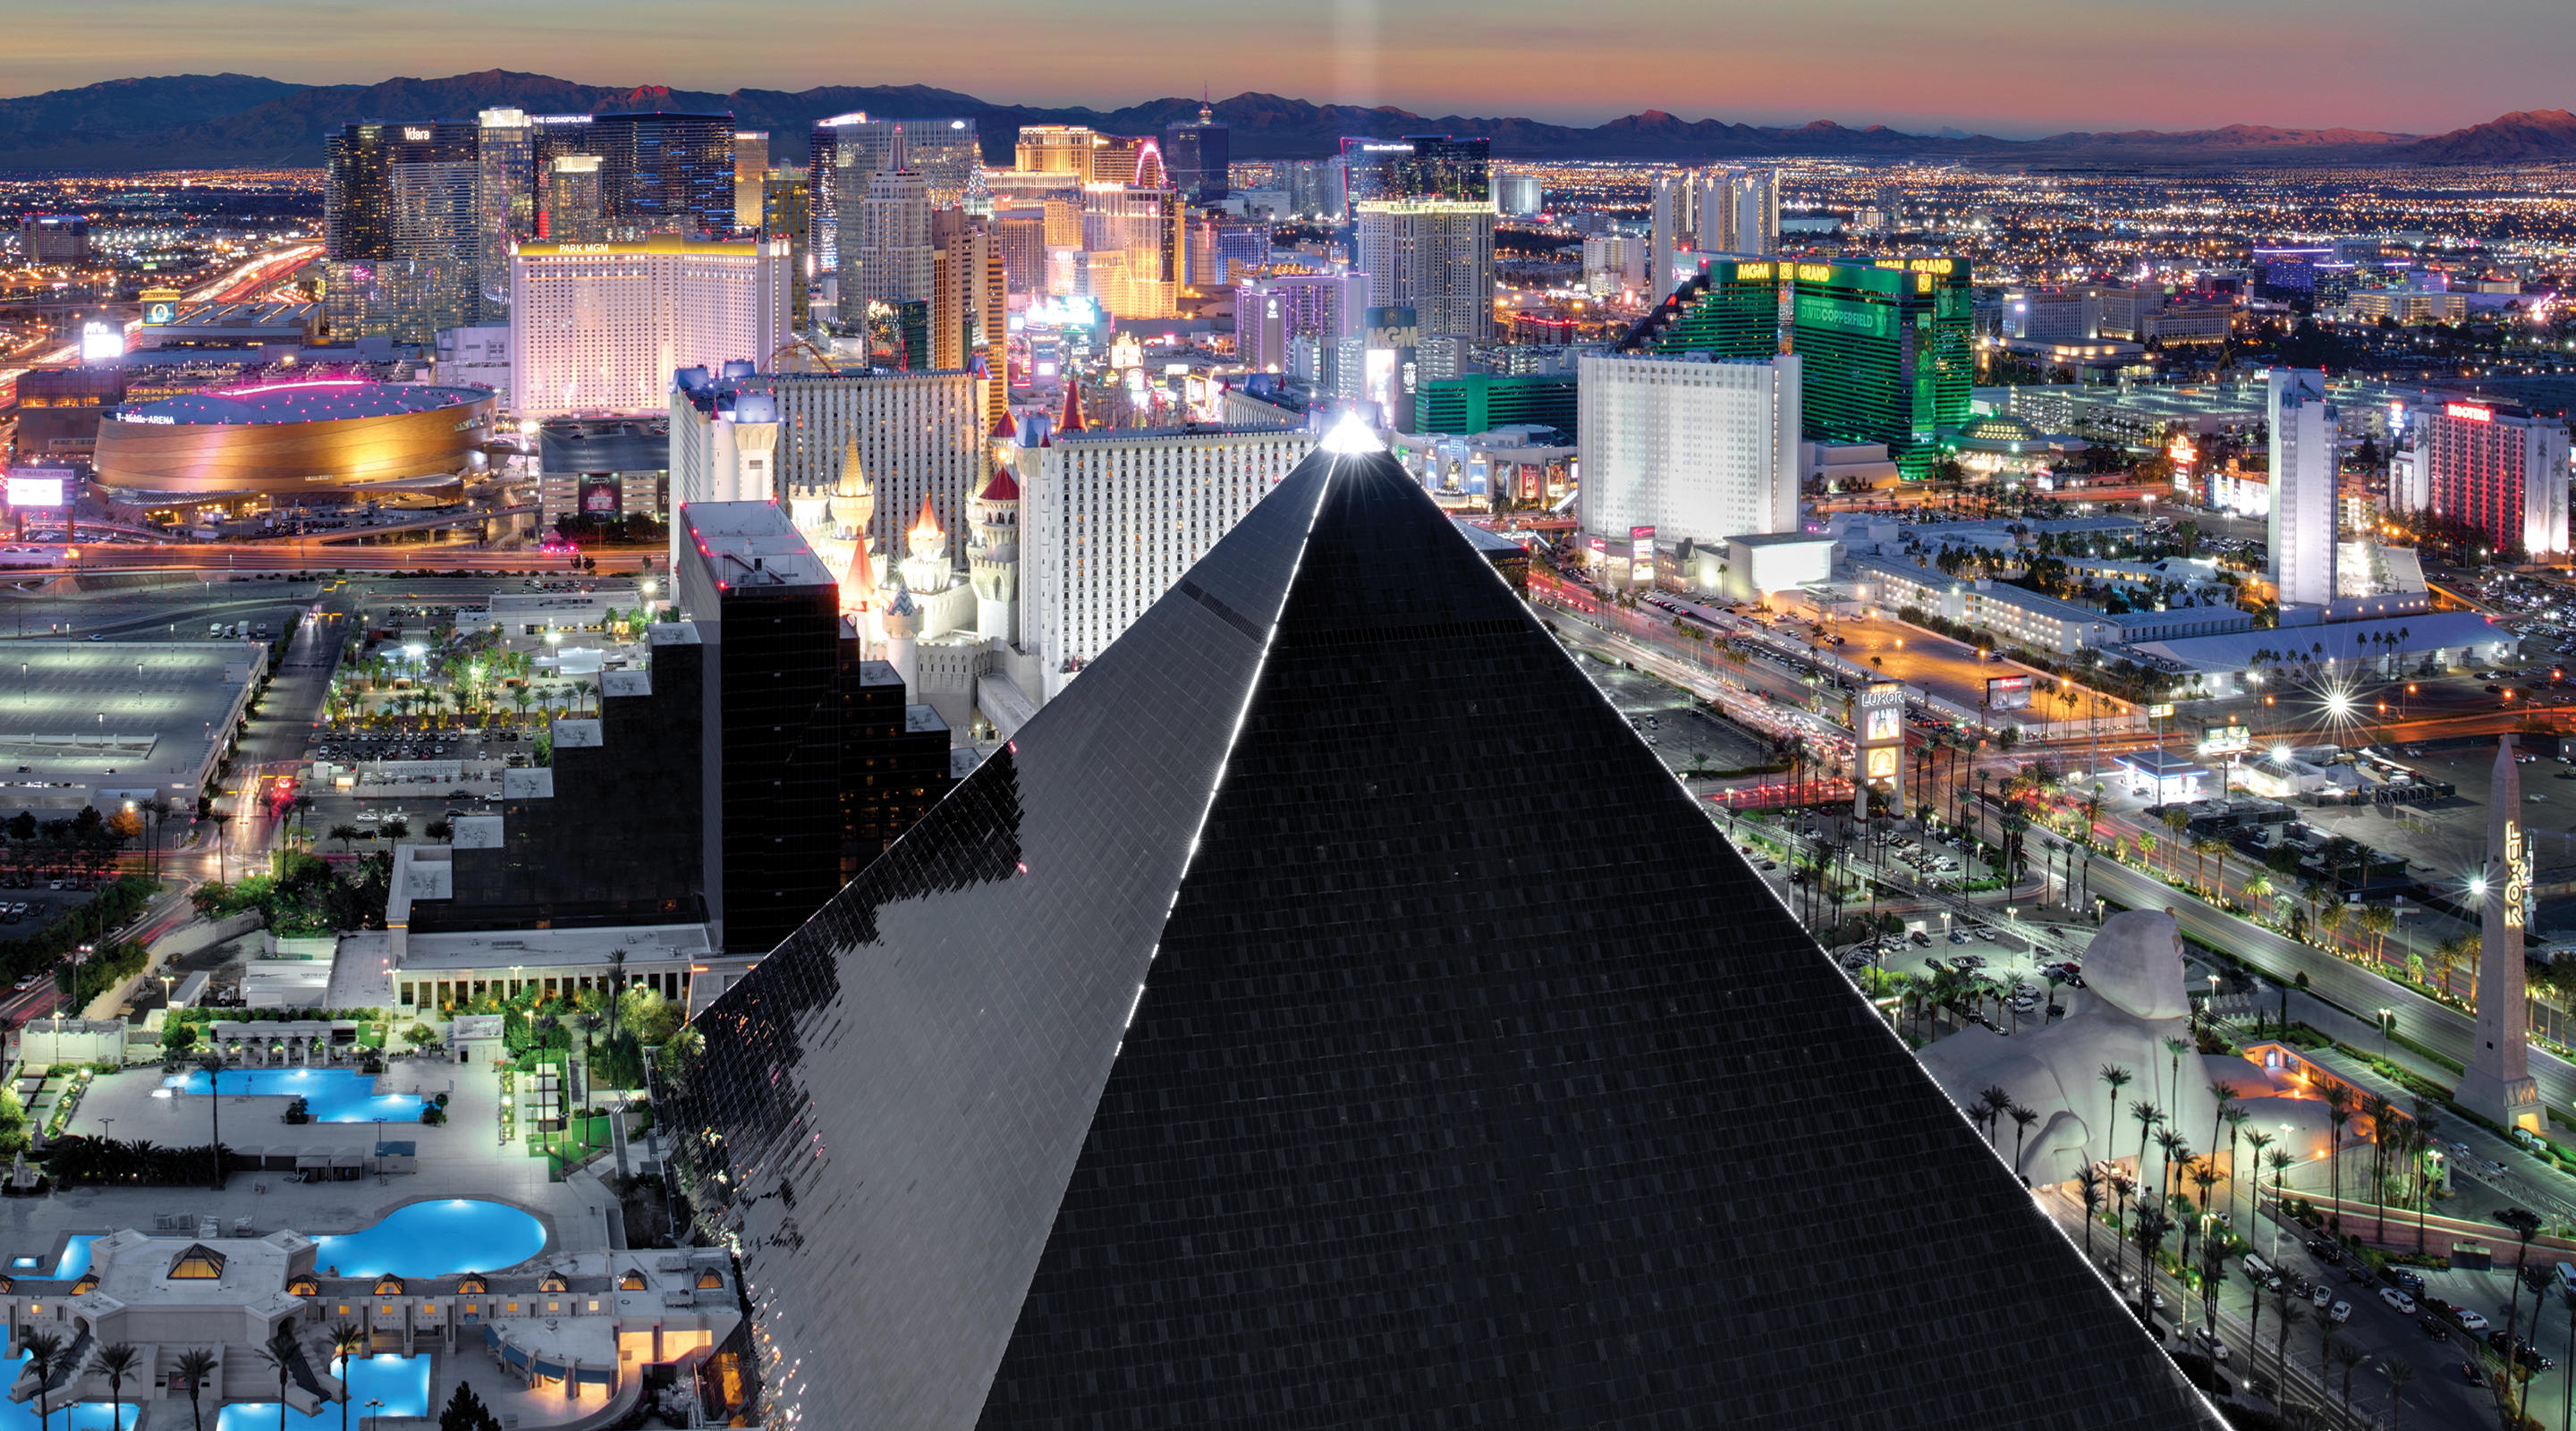 View of the Luxor Pyramid at night.